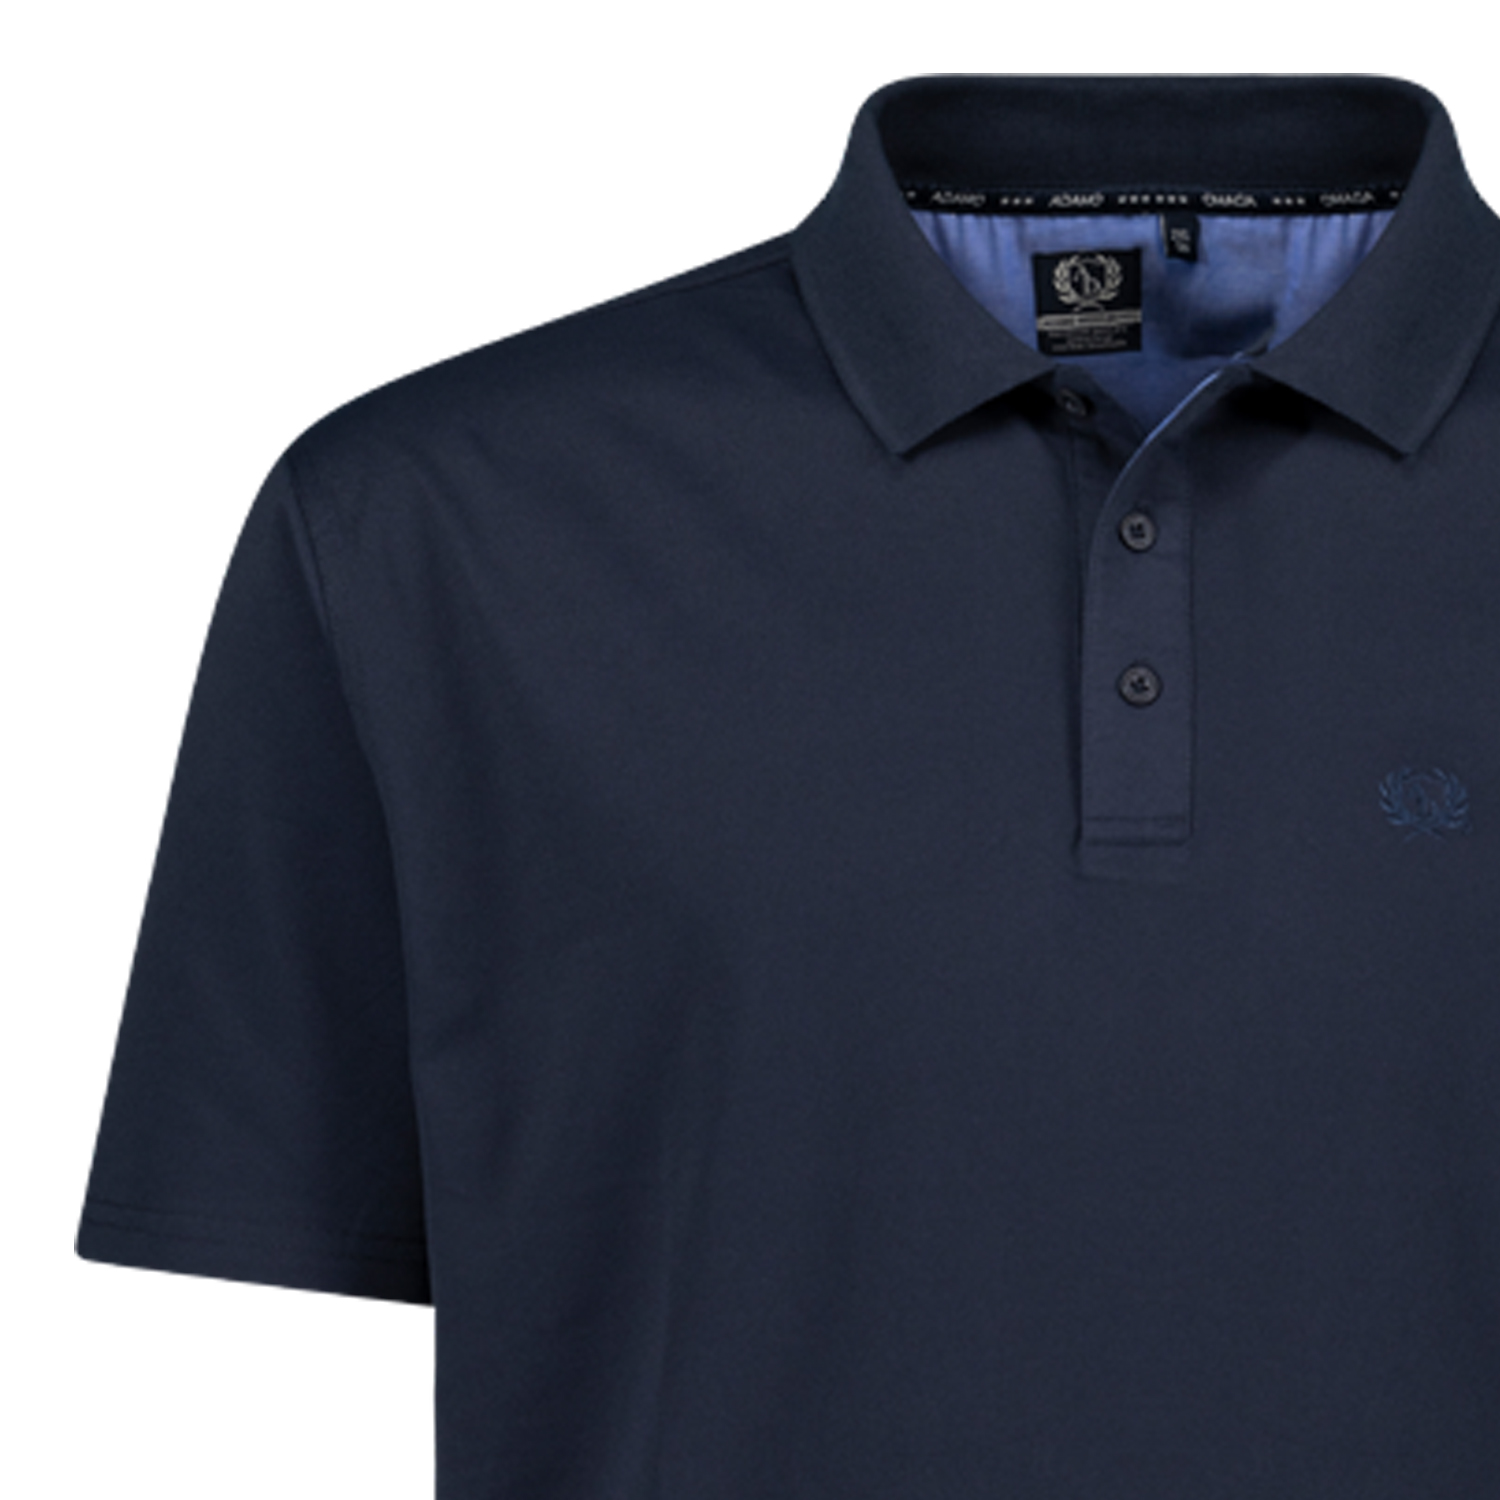 Functional polo shirt in navy for men by Adamo series "PEER" Tall Fit extra long in long sizes up to 5XLT